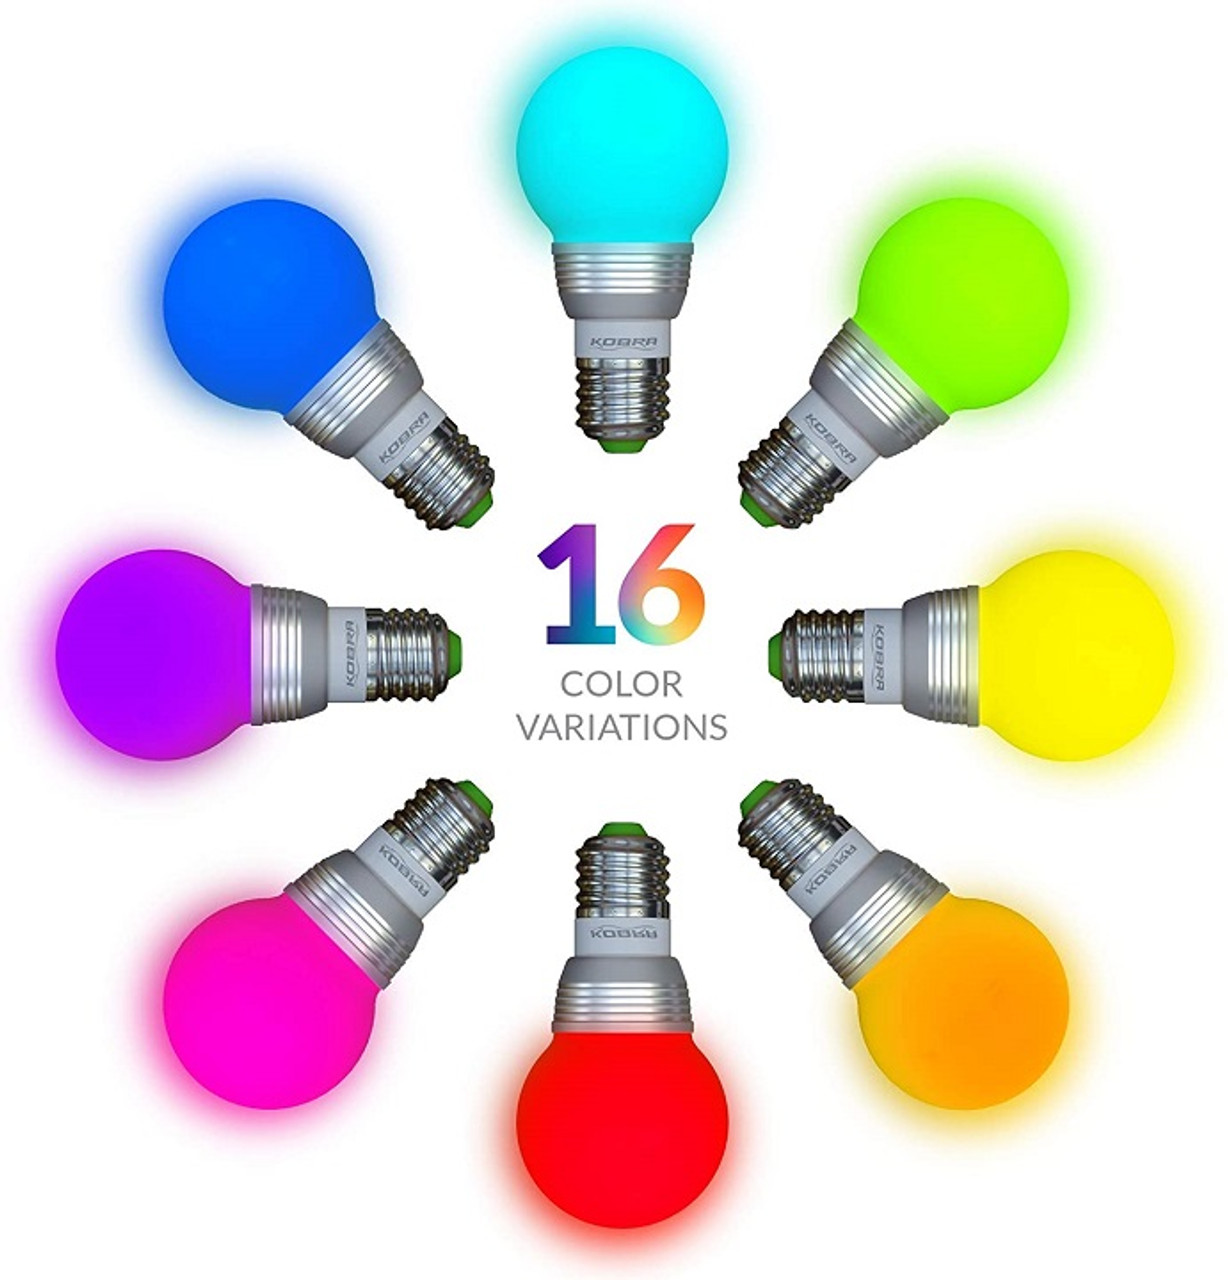 Kobra™ LED Color-Changing Light Bulb with Remote (2- to 4-Pack) product image